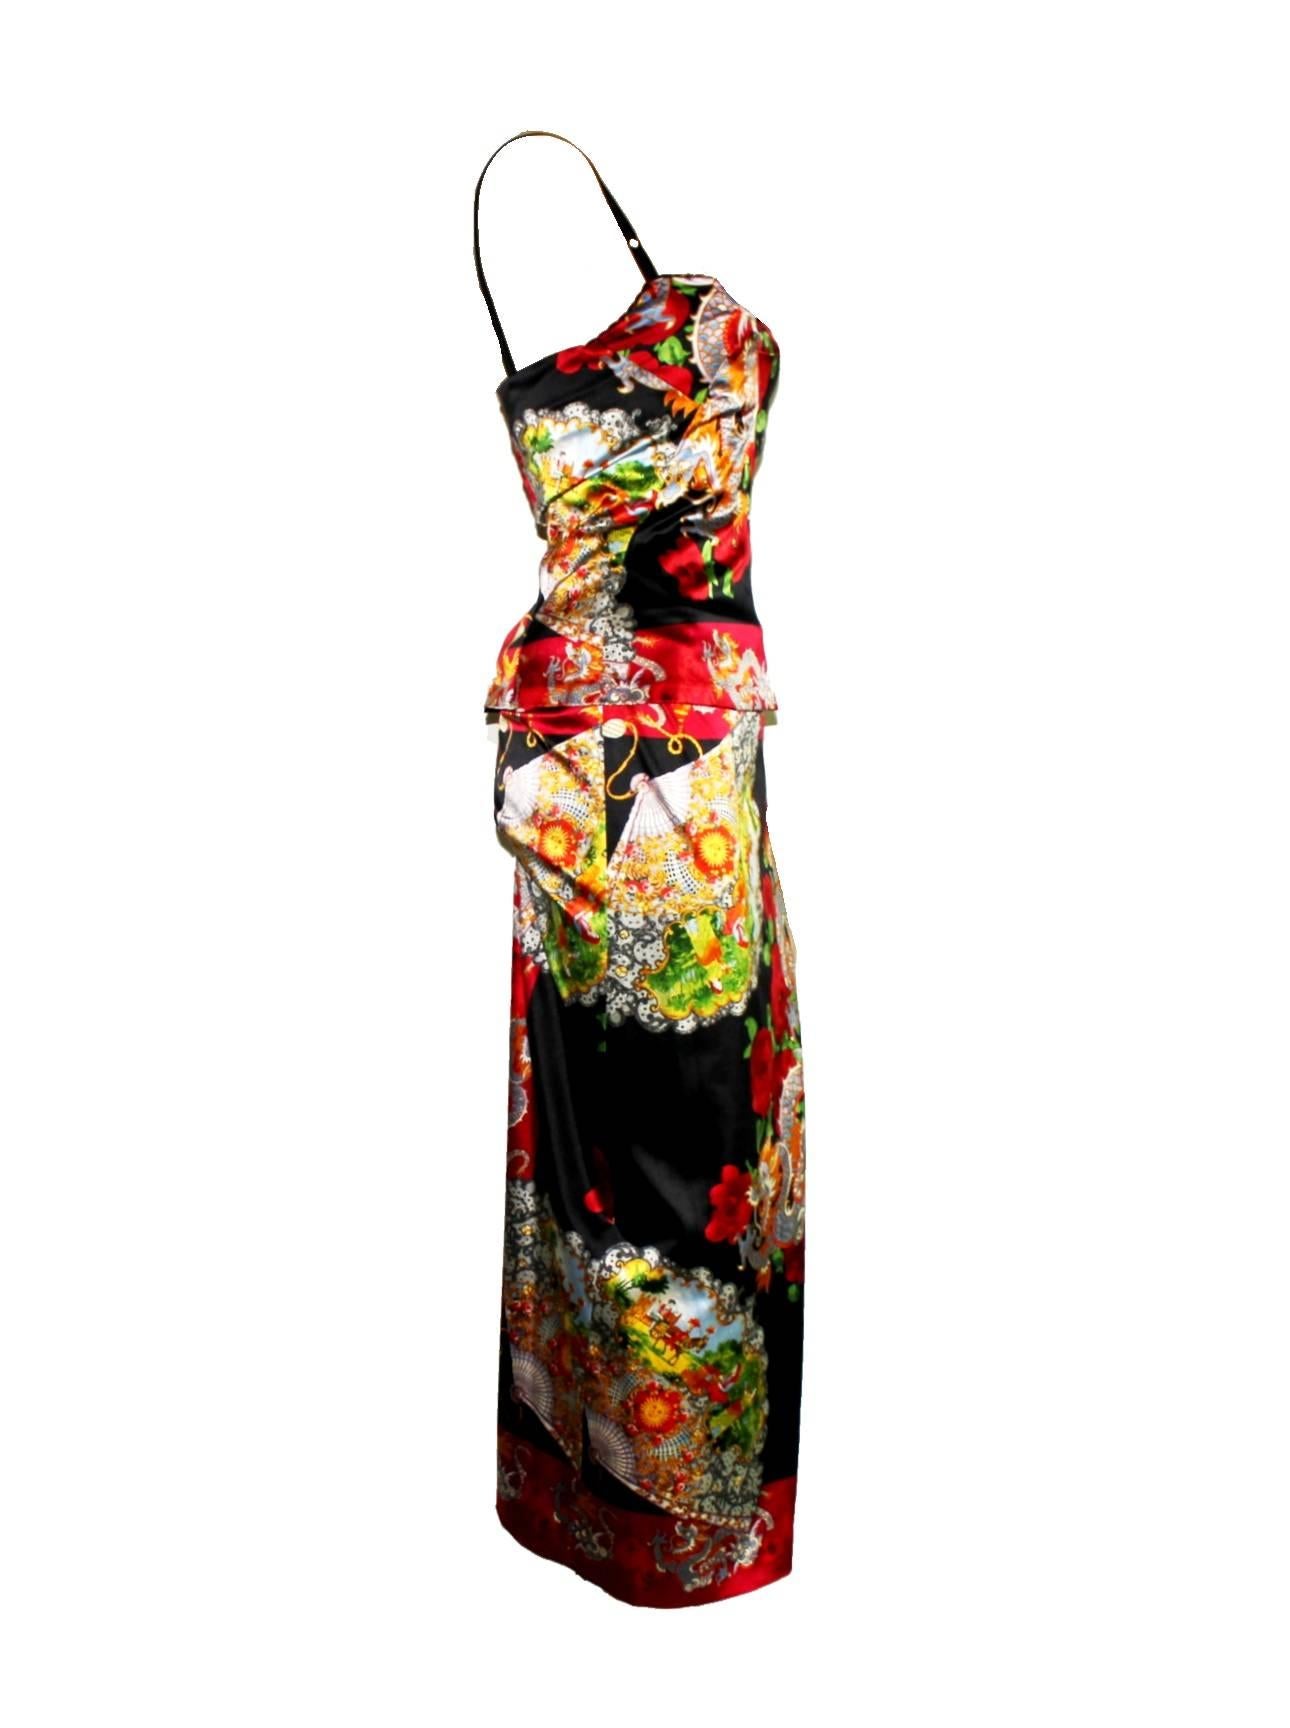 BREATHTAKING

DOLCE & GABBANA

CHINESE PRINT CORSET ENSEMBLE DRESS GOWN

COLLECTOR'S PIECE

EXACTLY THIS COMBINATION IS ALREADY PART OF A FIT MUSEUM'S COLLECTION!!

DETAILS:

    A DOLCE & GABBANA classic signature piece that will last